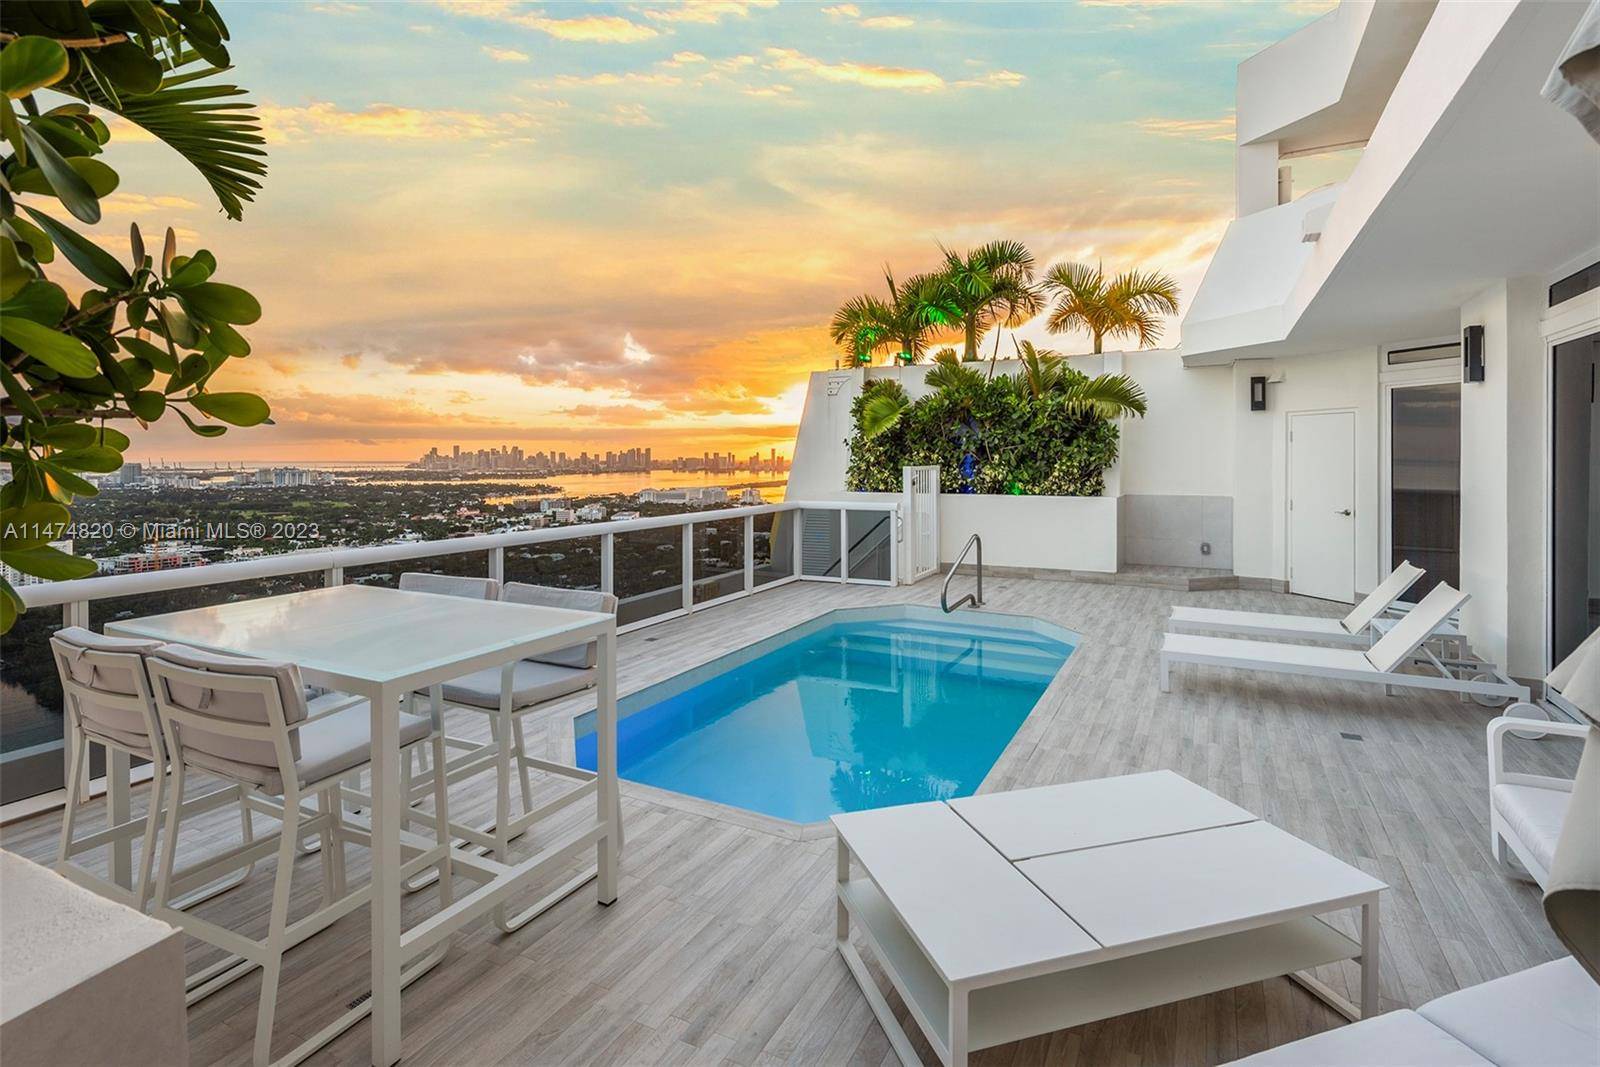 Escape to the epitome of Miami Beach luxury at Tower Suite 4404 a 2 story penthouse where panoramic vistas of the ocean, city skyline, and night lights are just the ...